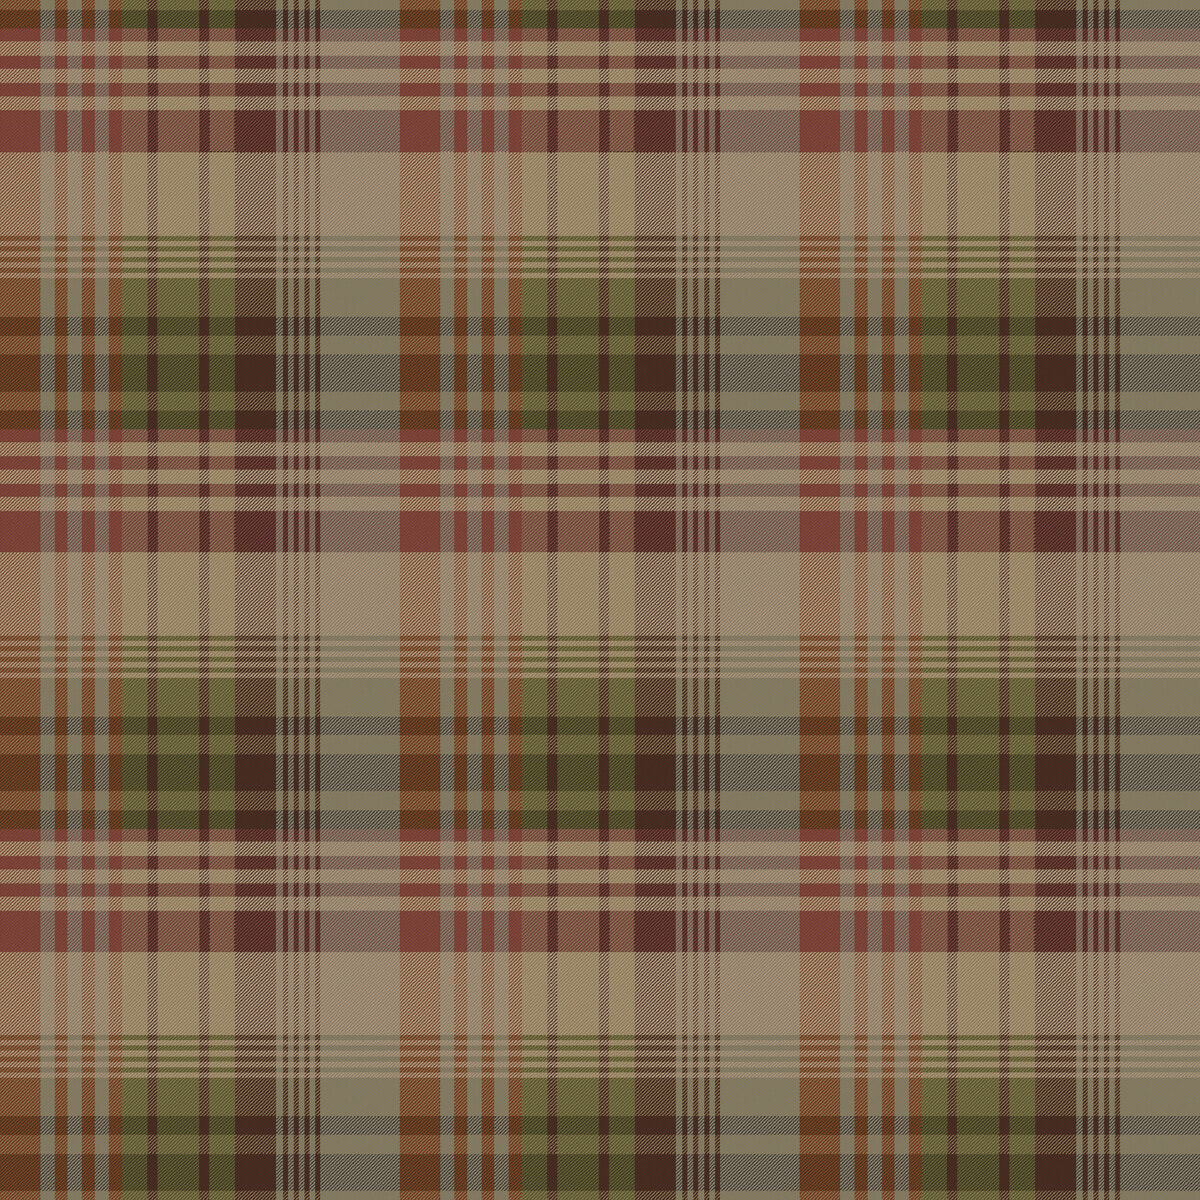 Green Plaid Fabric, Wallpaper and Home Decor